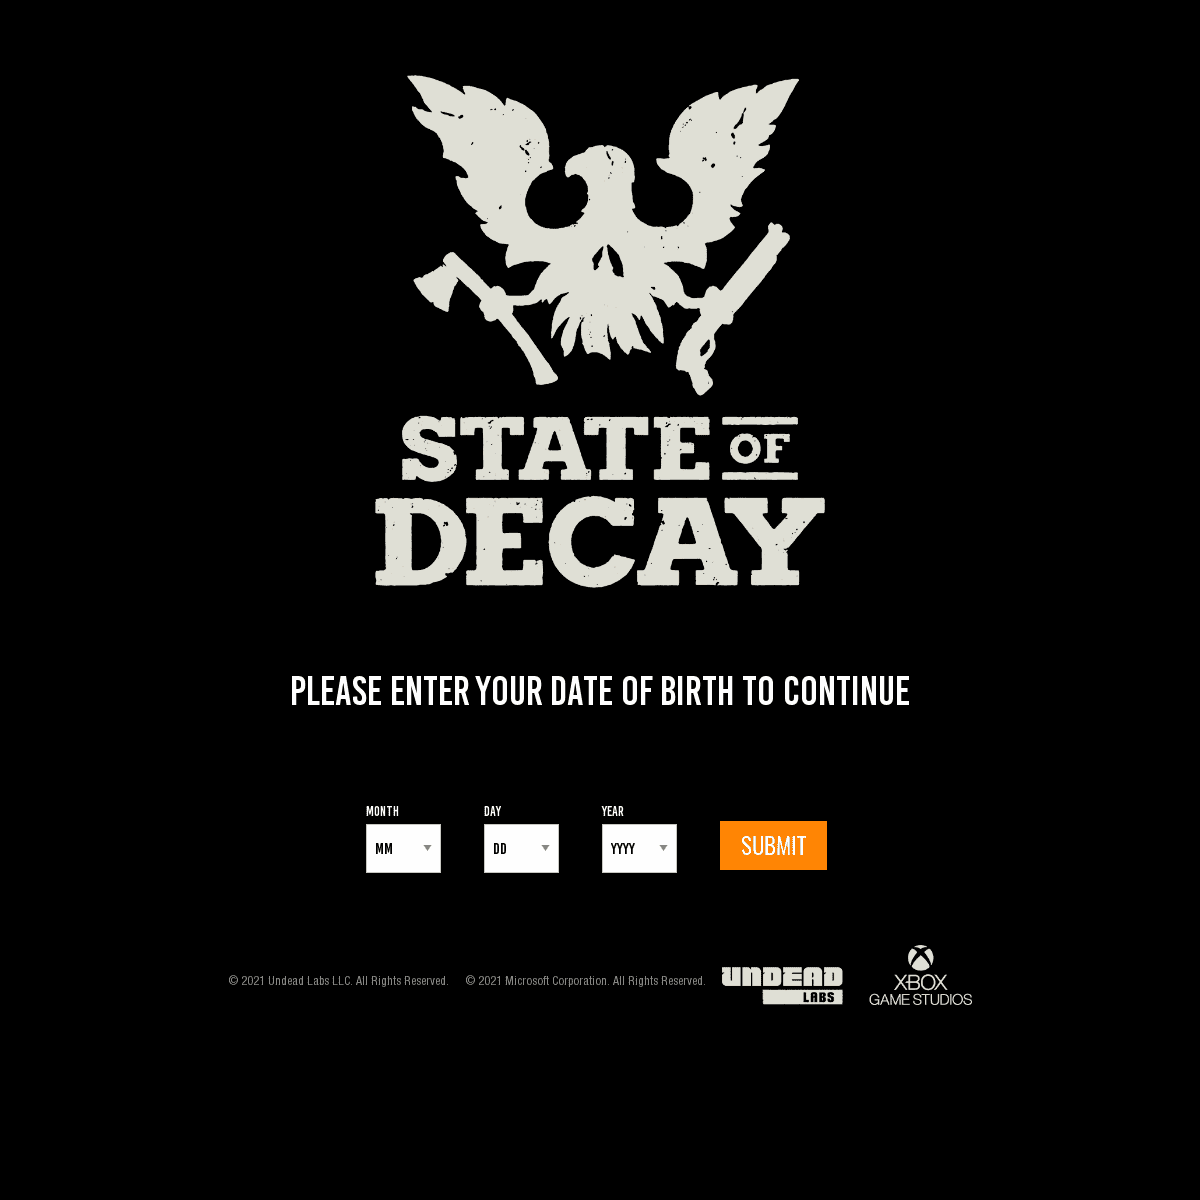 A complete backup of https://stateofdecay.com